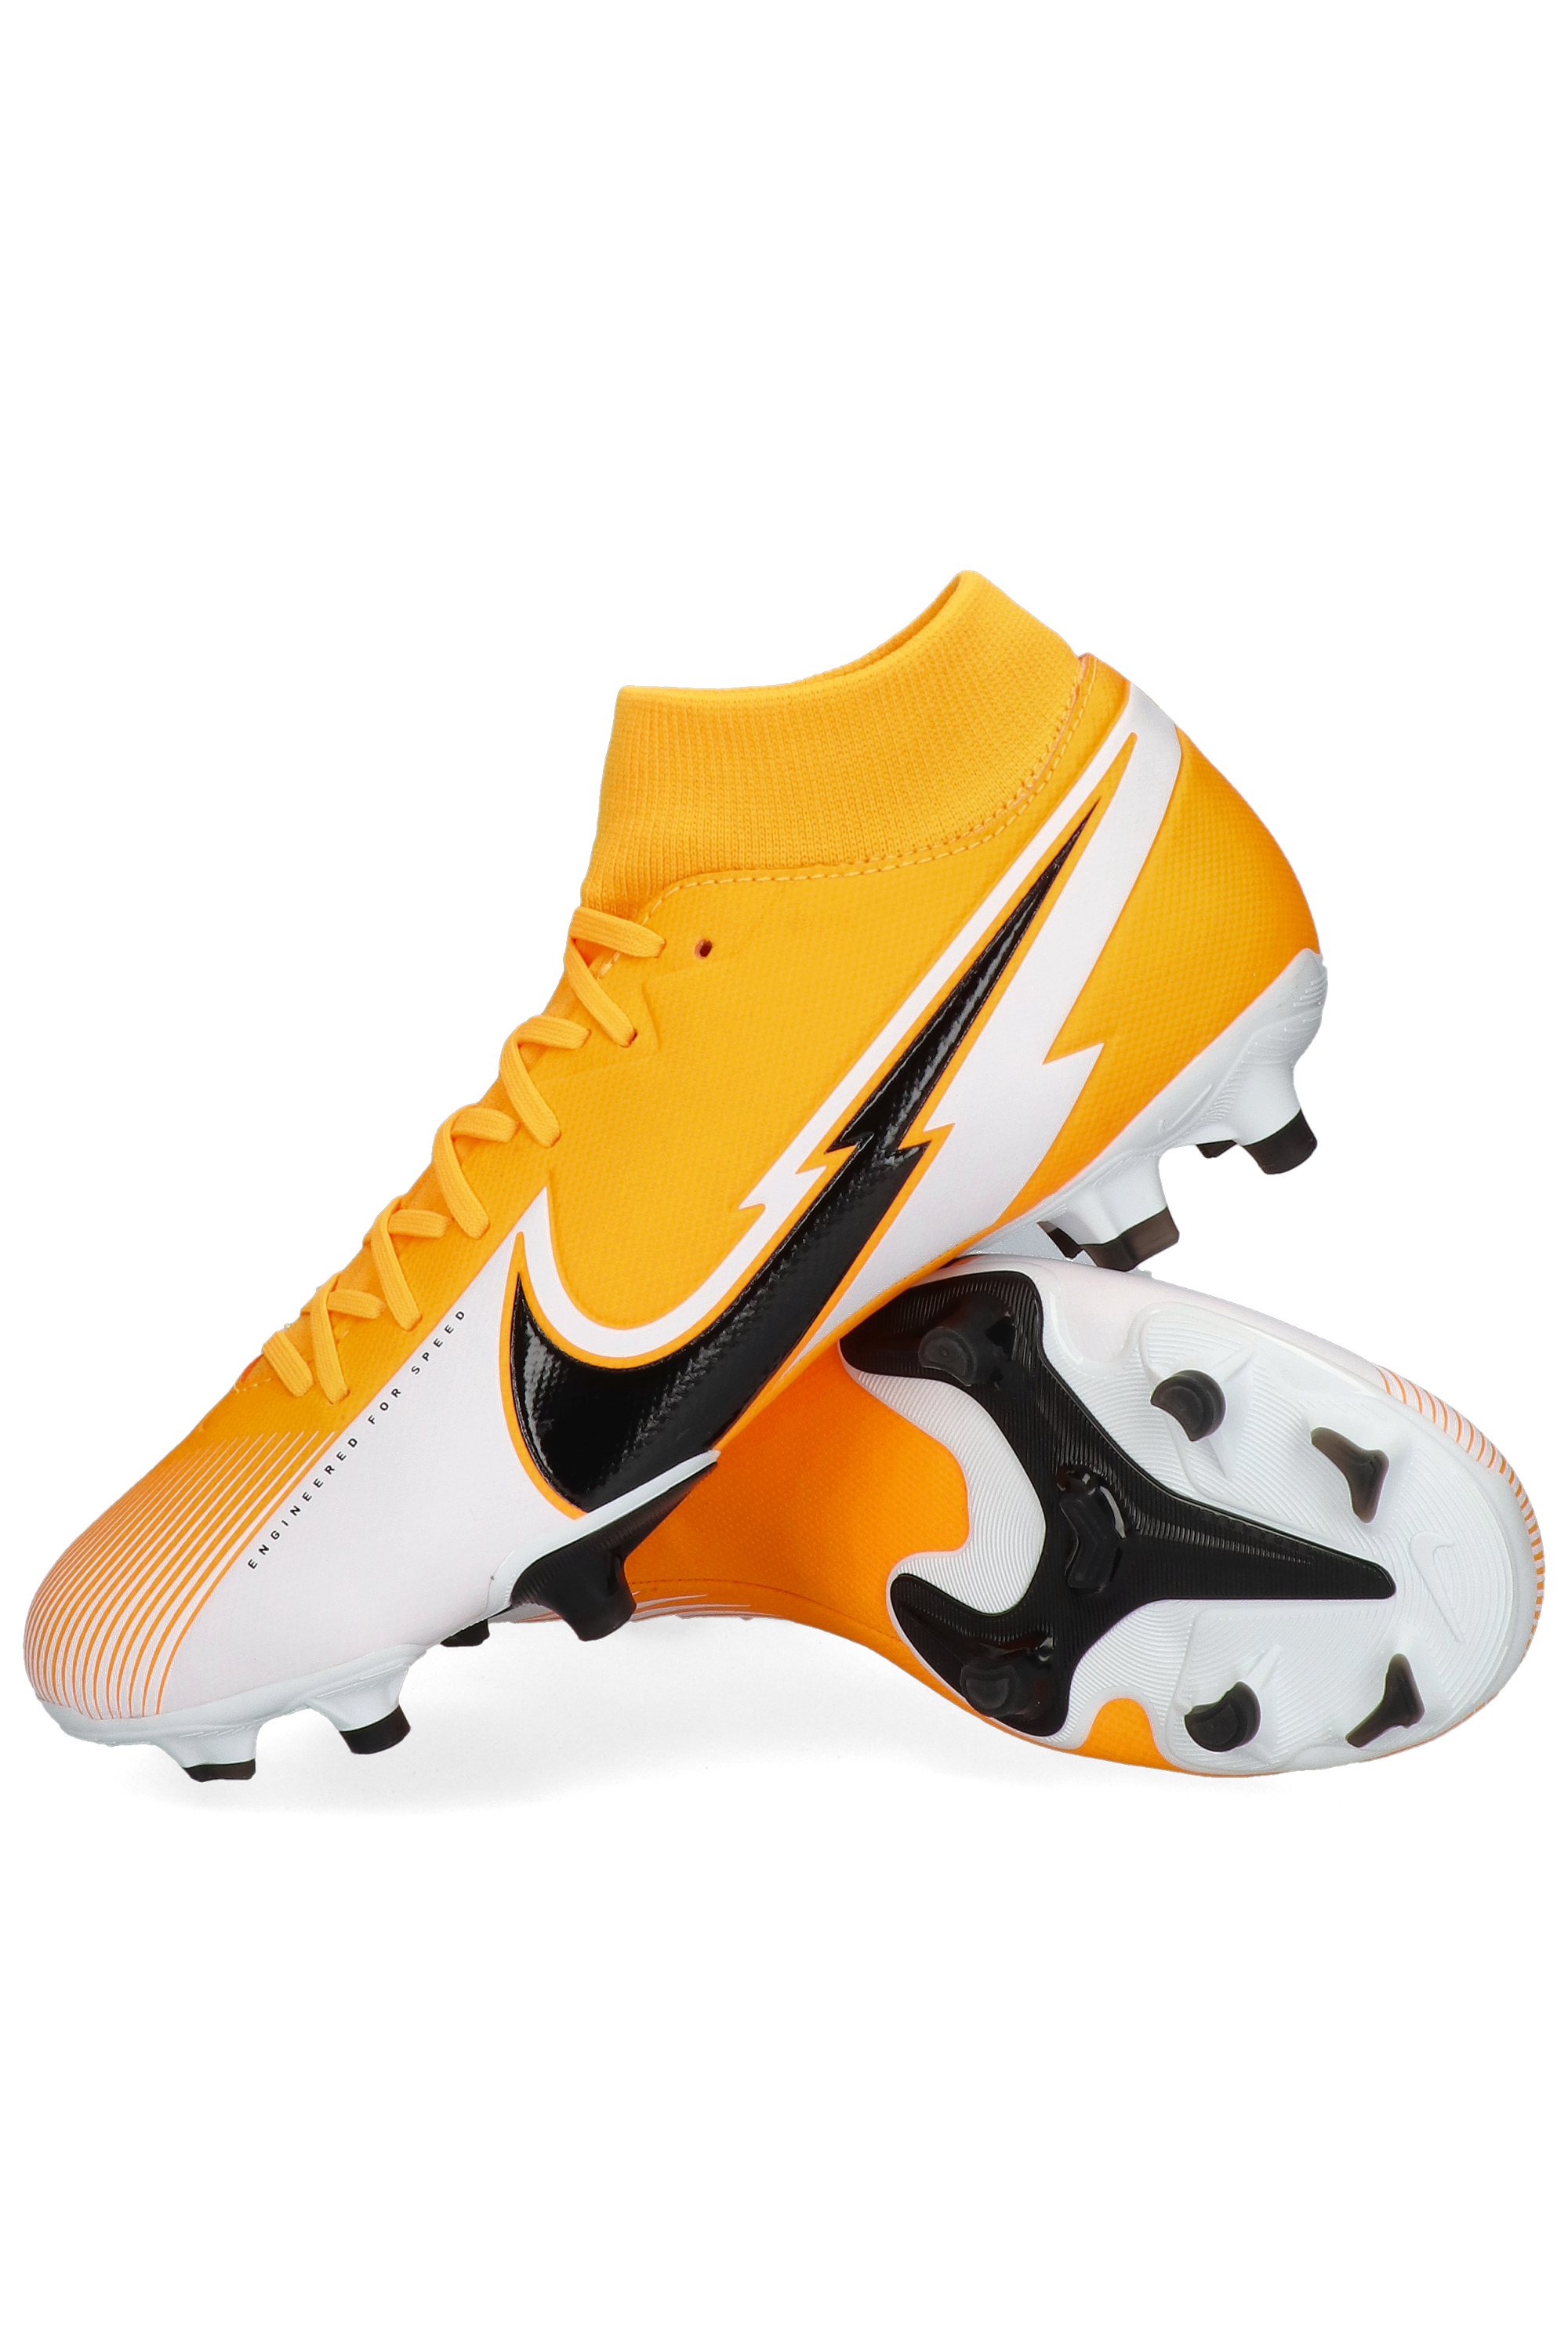 Nike Mercurial Superfly 7 Academy Fg Soccer Cleats Cheap Buy Online